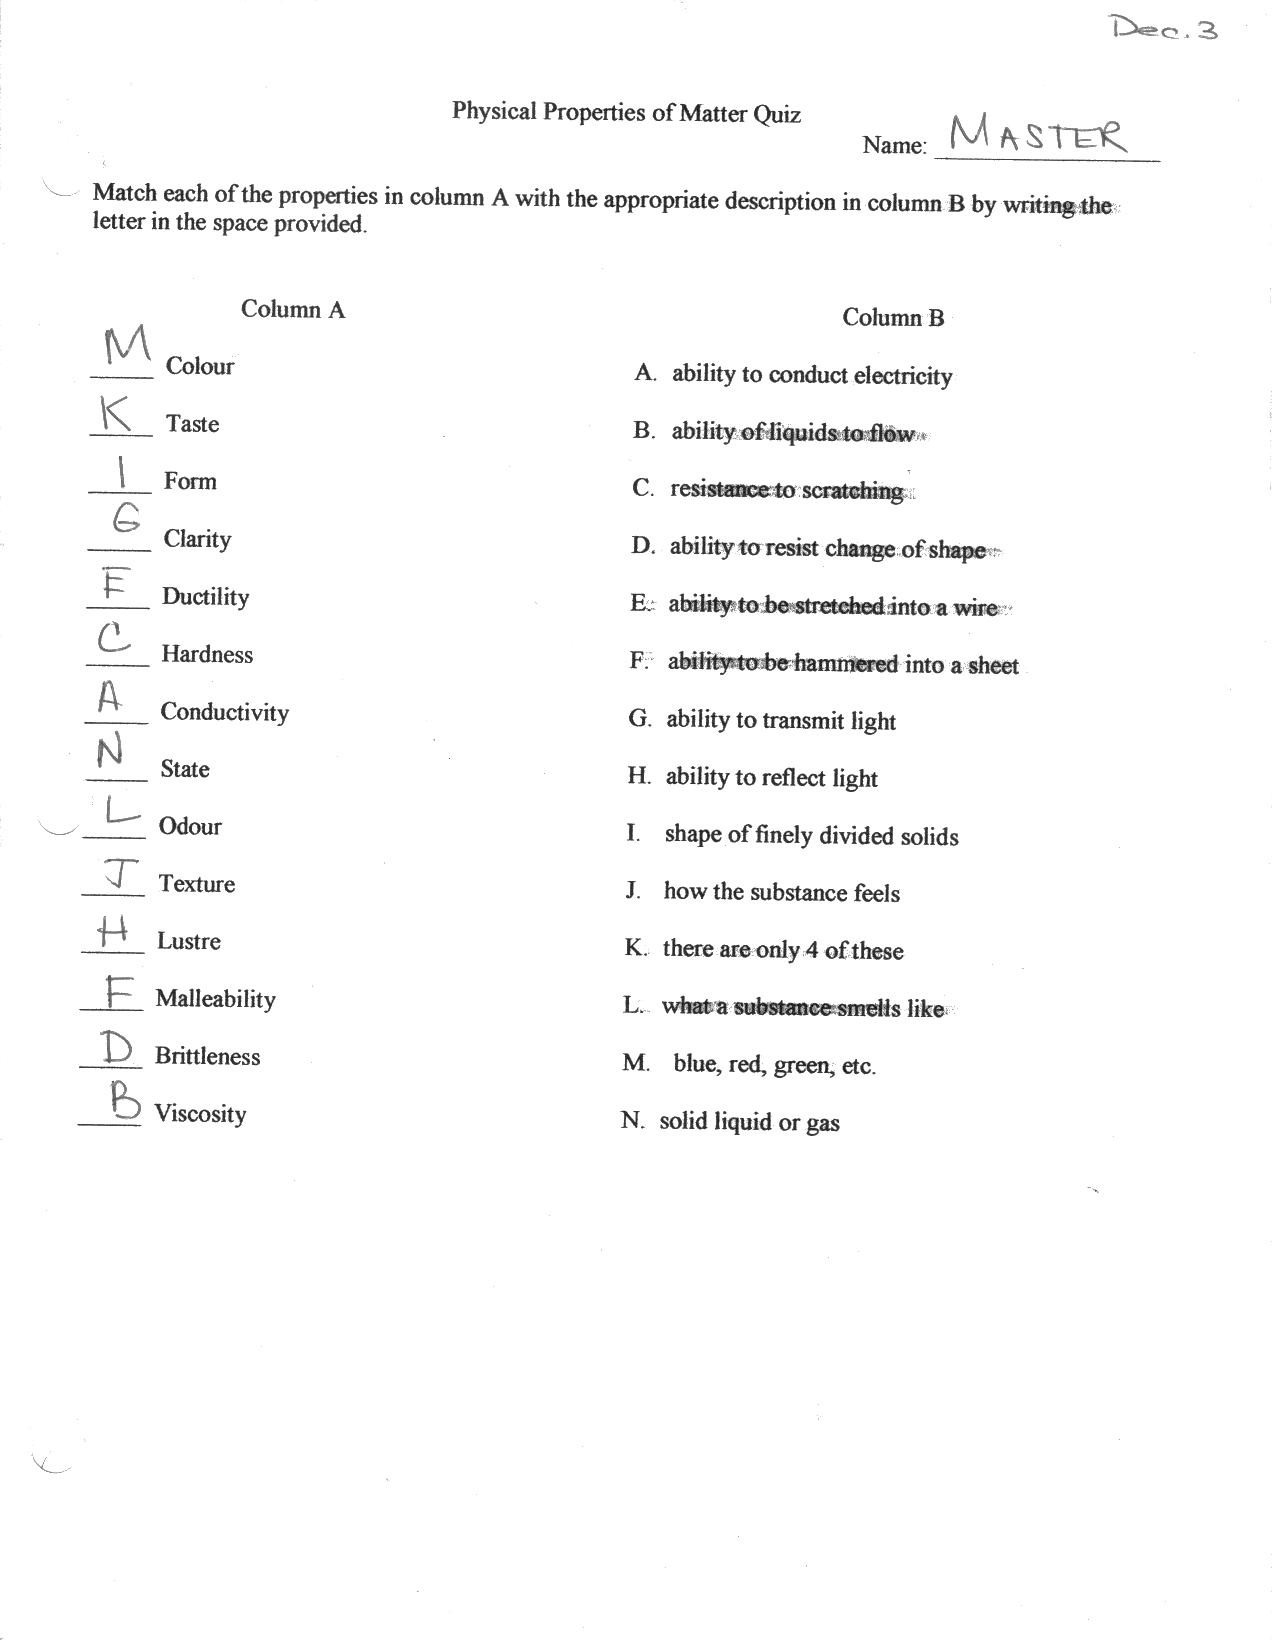 Physical And Chemical Properties Worksheet Physical Science